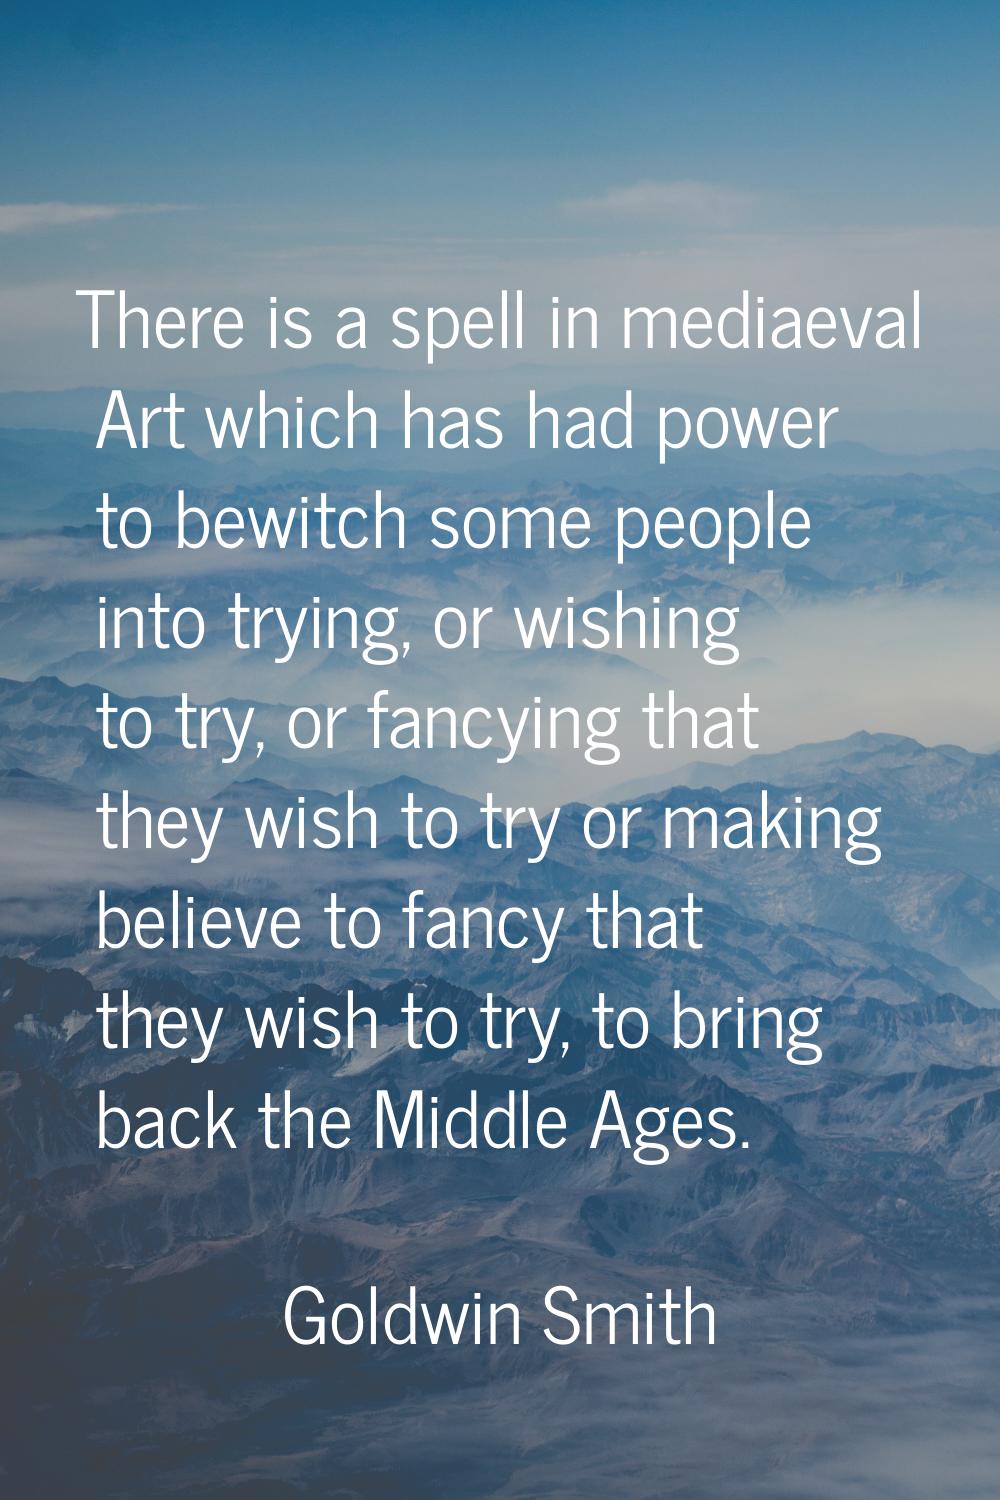 There is a spell in mediaeval Art which has had power to bewitch some people into trying, or wishin